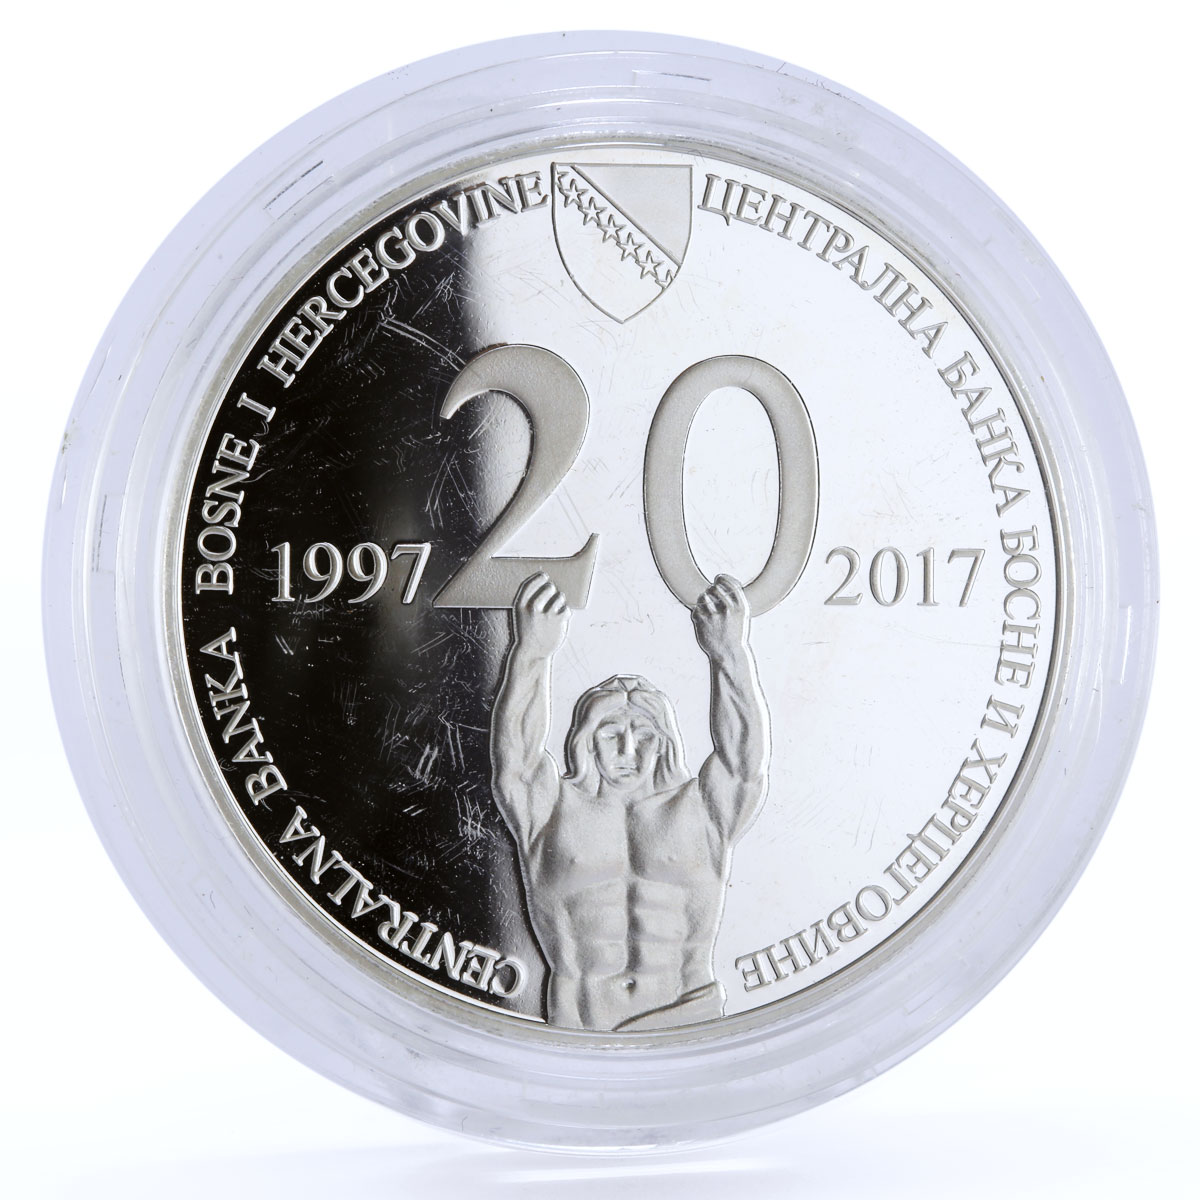 Bosnia and Herzegovina 20 convertible marks 20 Years of Bank silver coin 2017